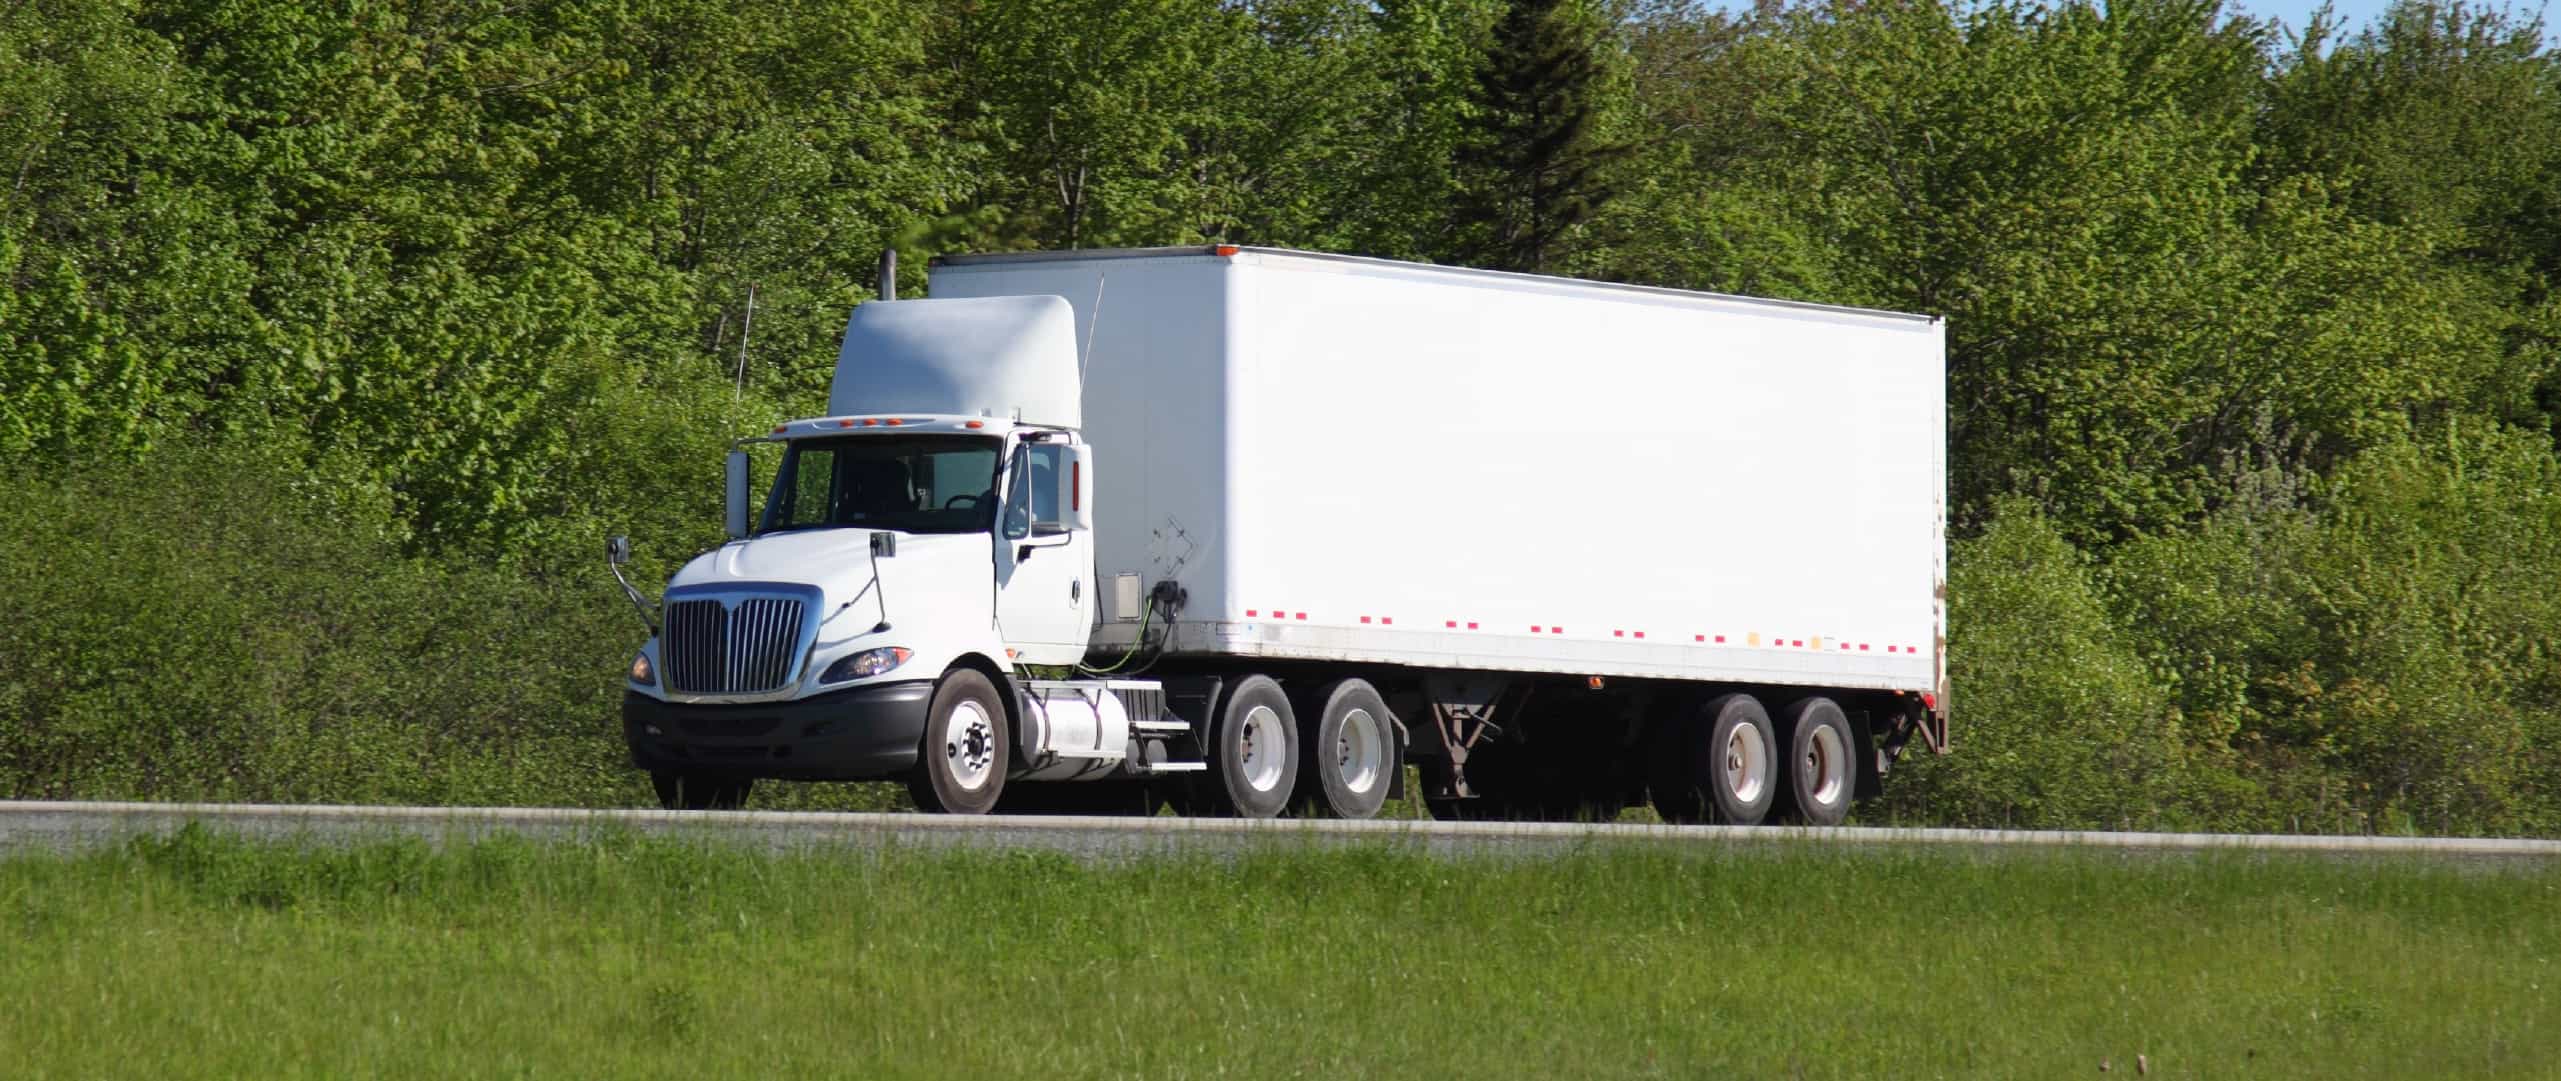 Buying a commercial what - should know | you truck Motive